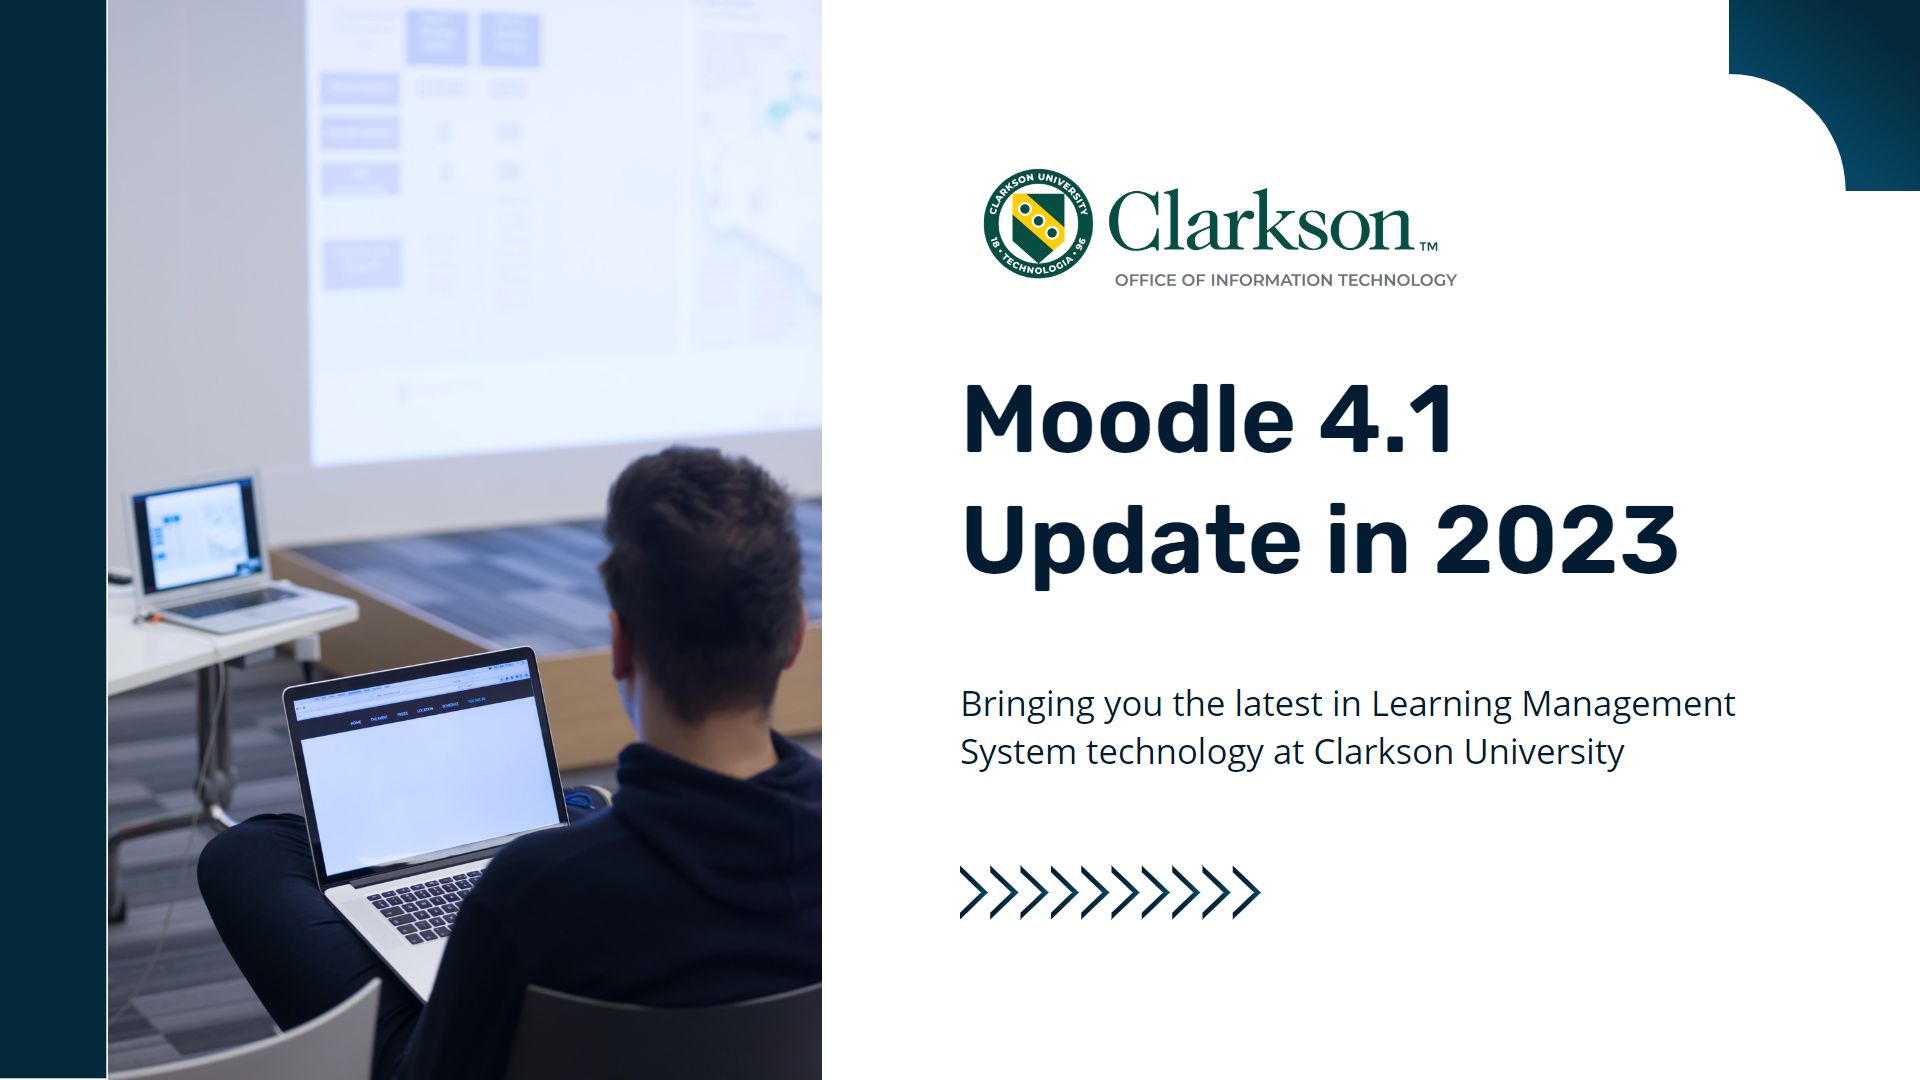 Moodle 4.1 Update in 2023